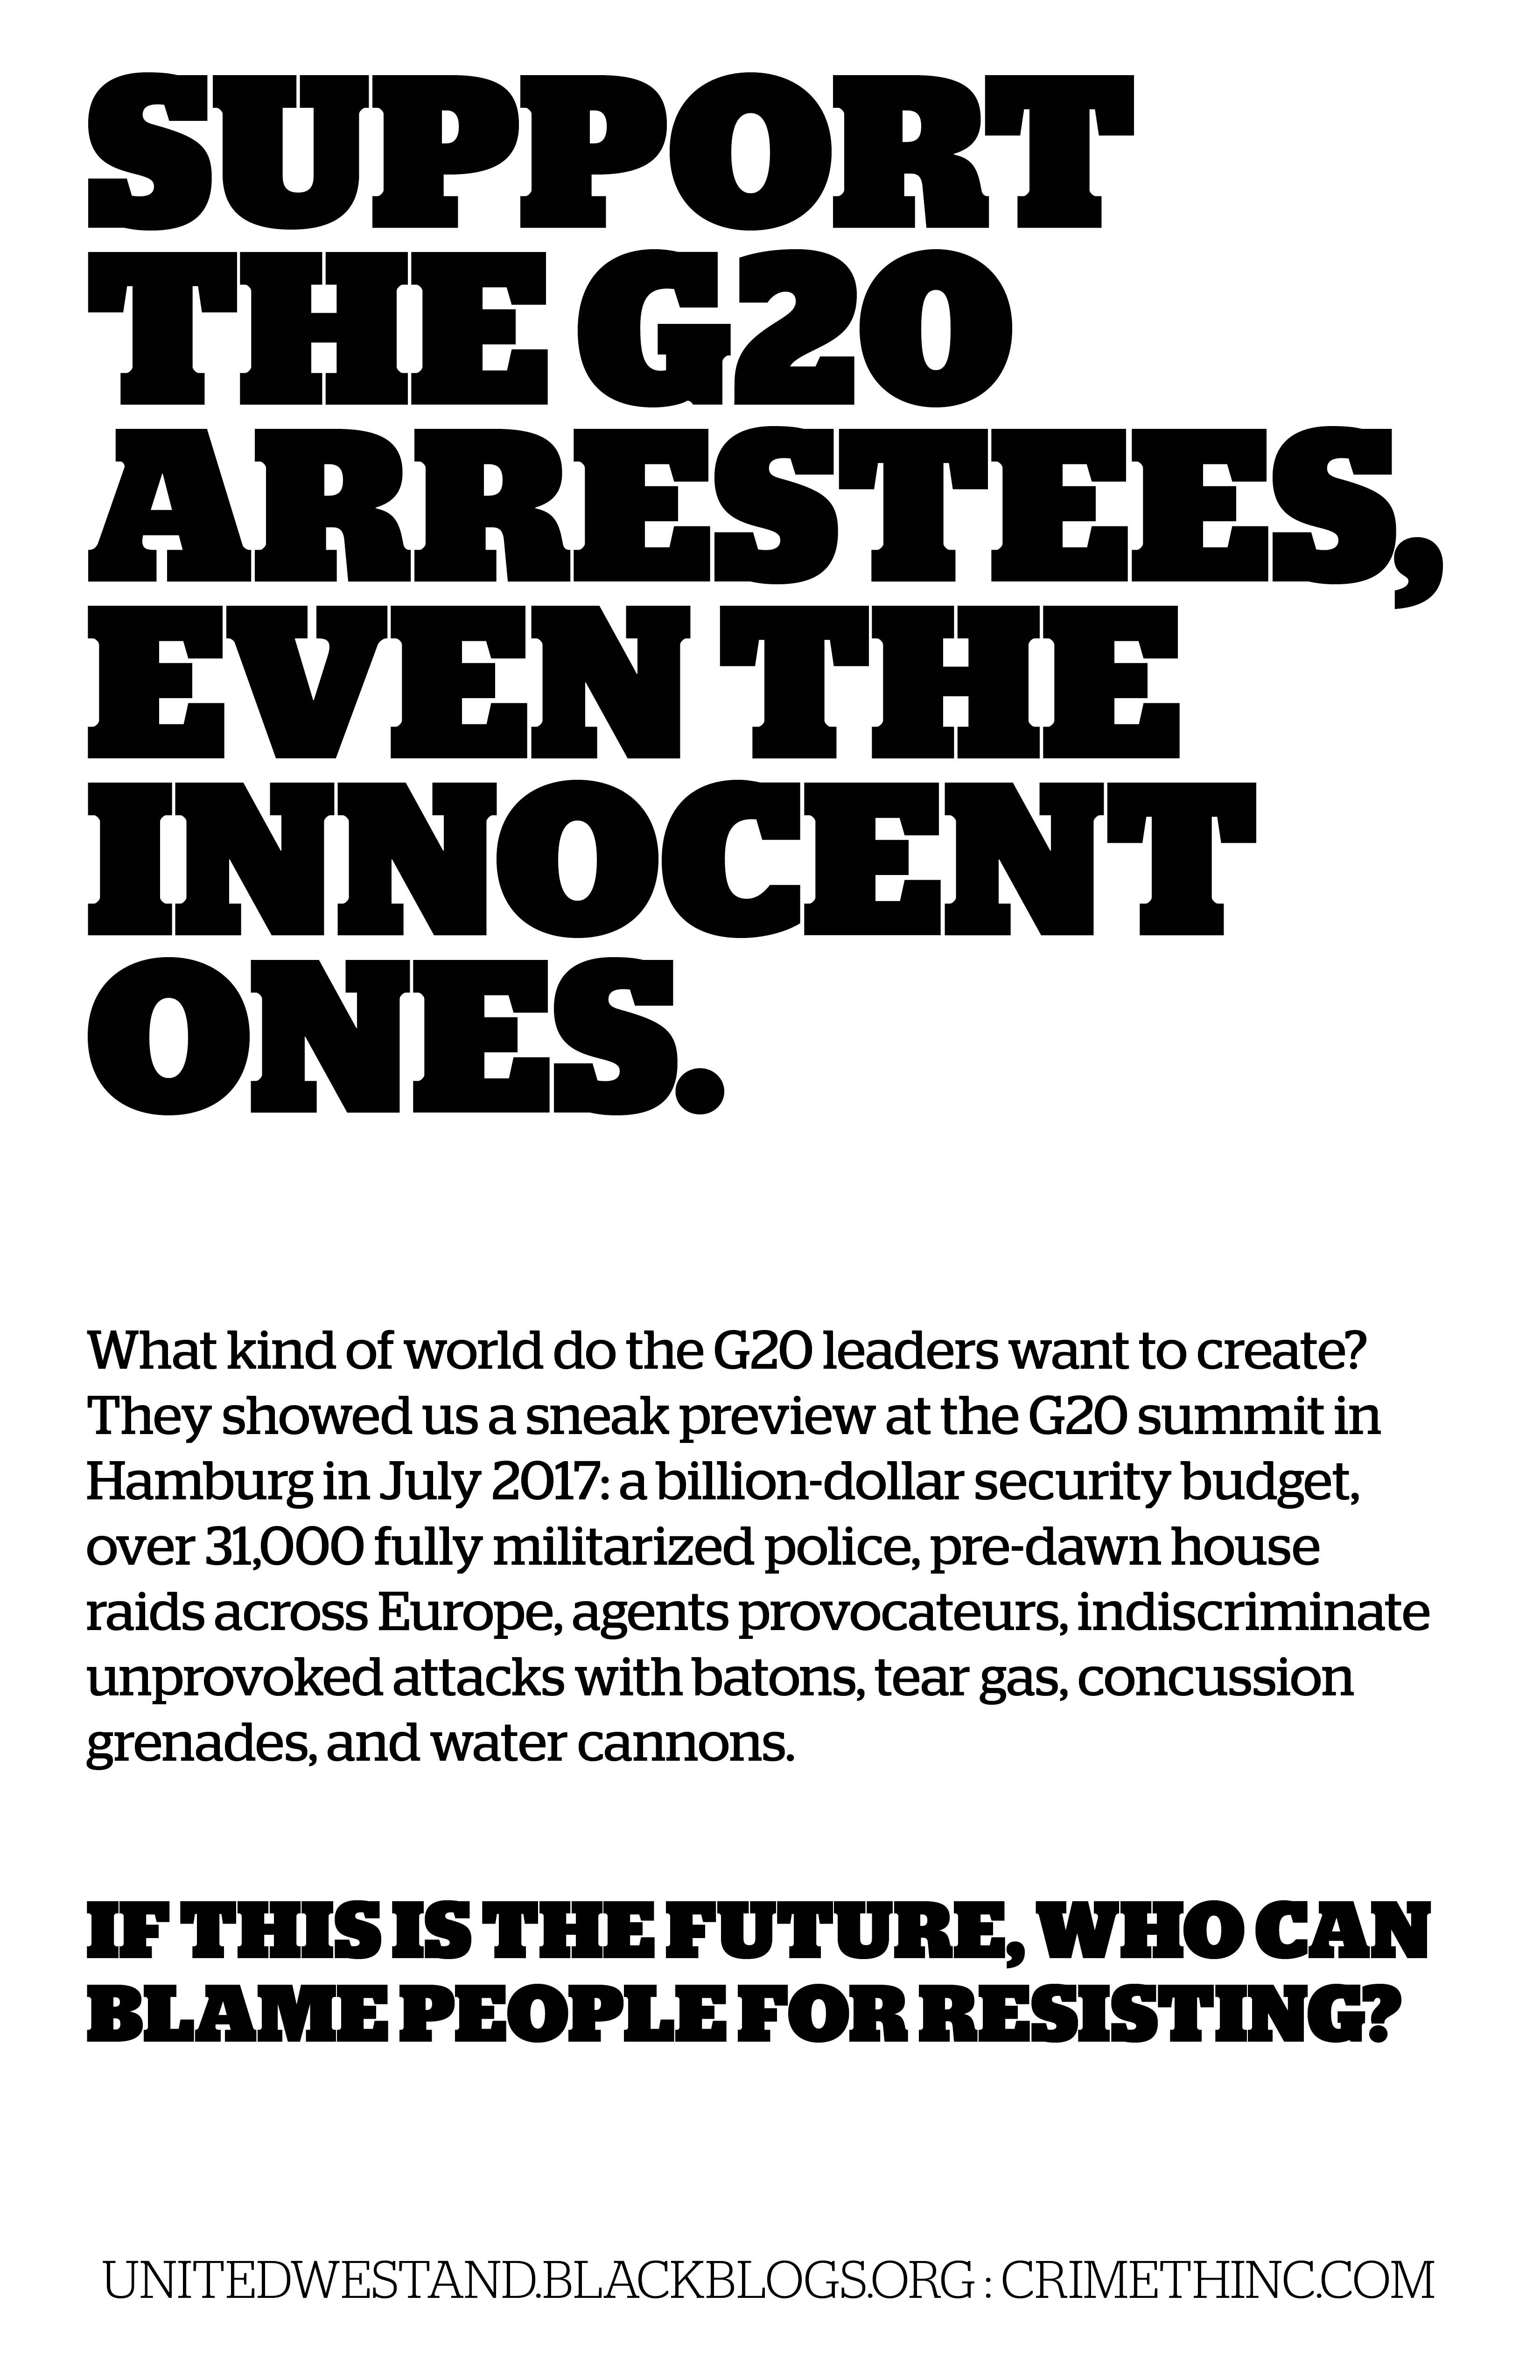 Photo of ‘Support the G20 Arrestees’ front side